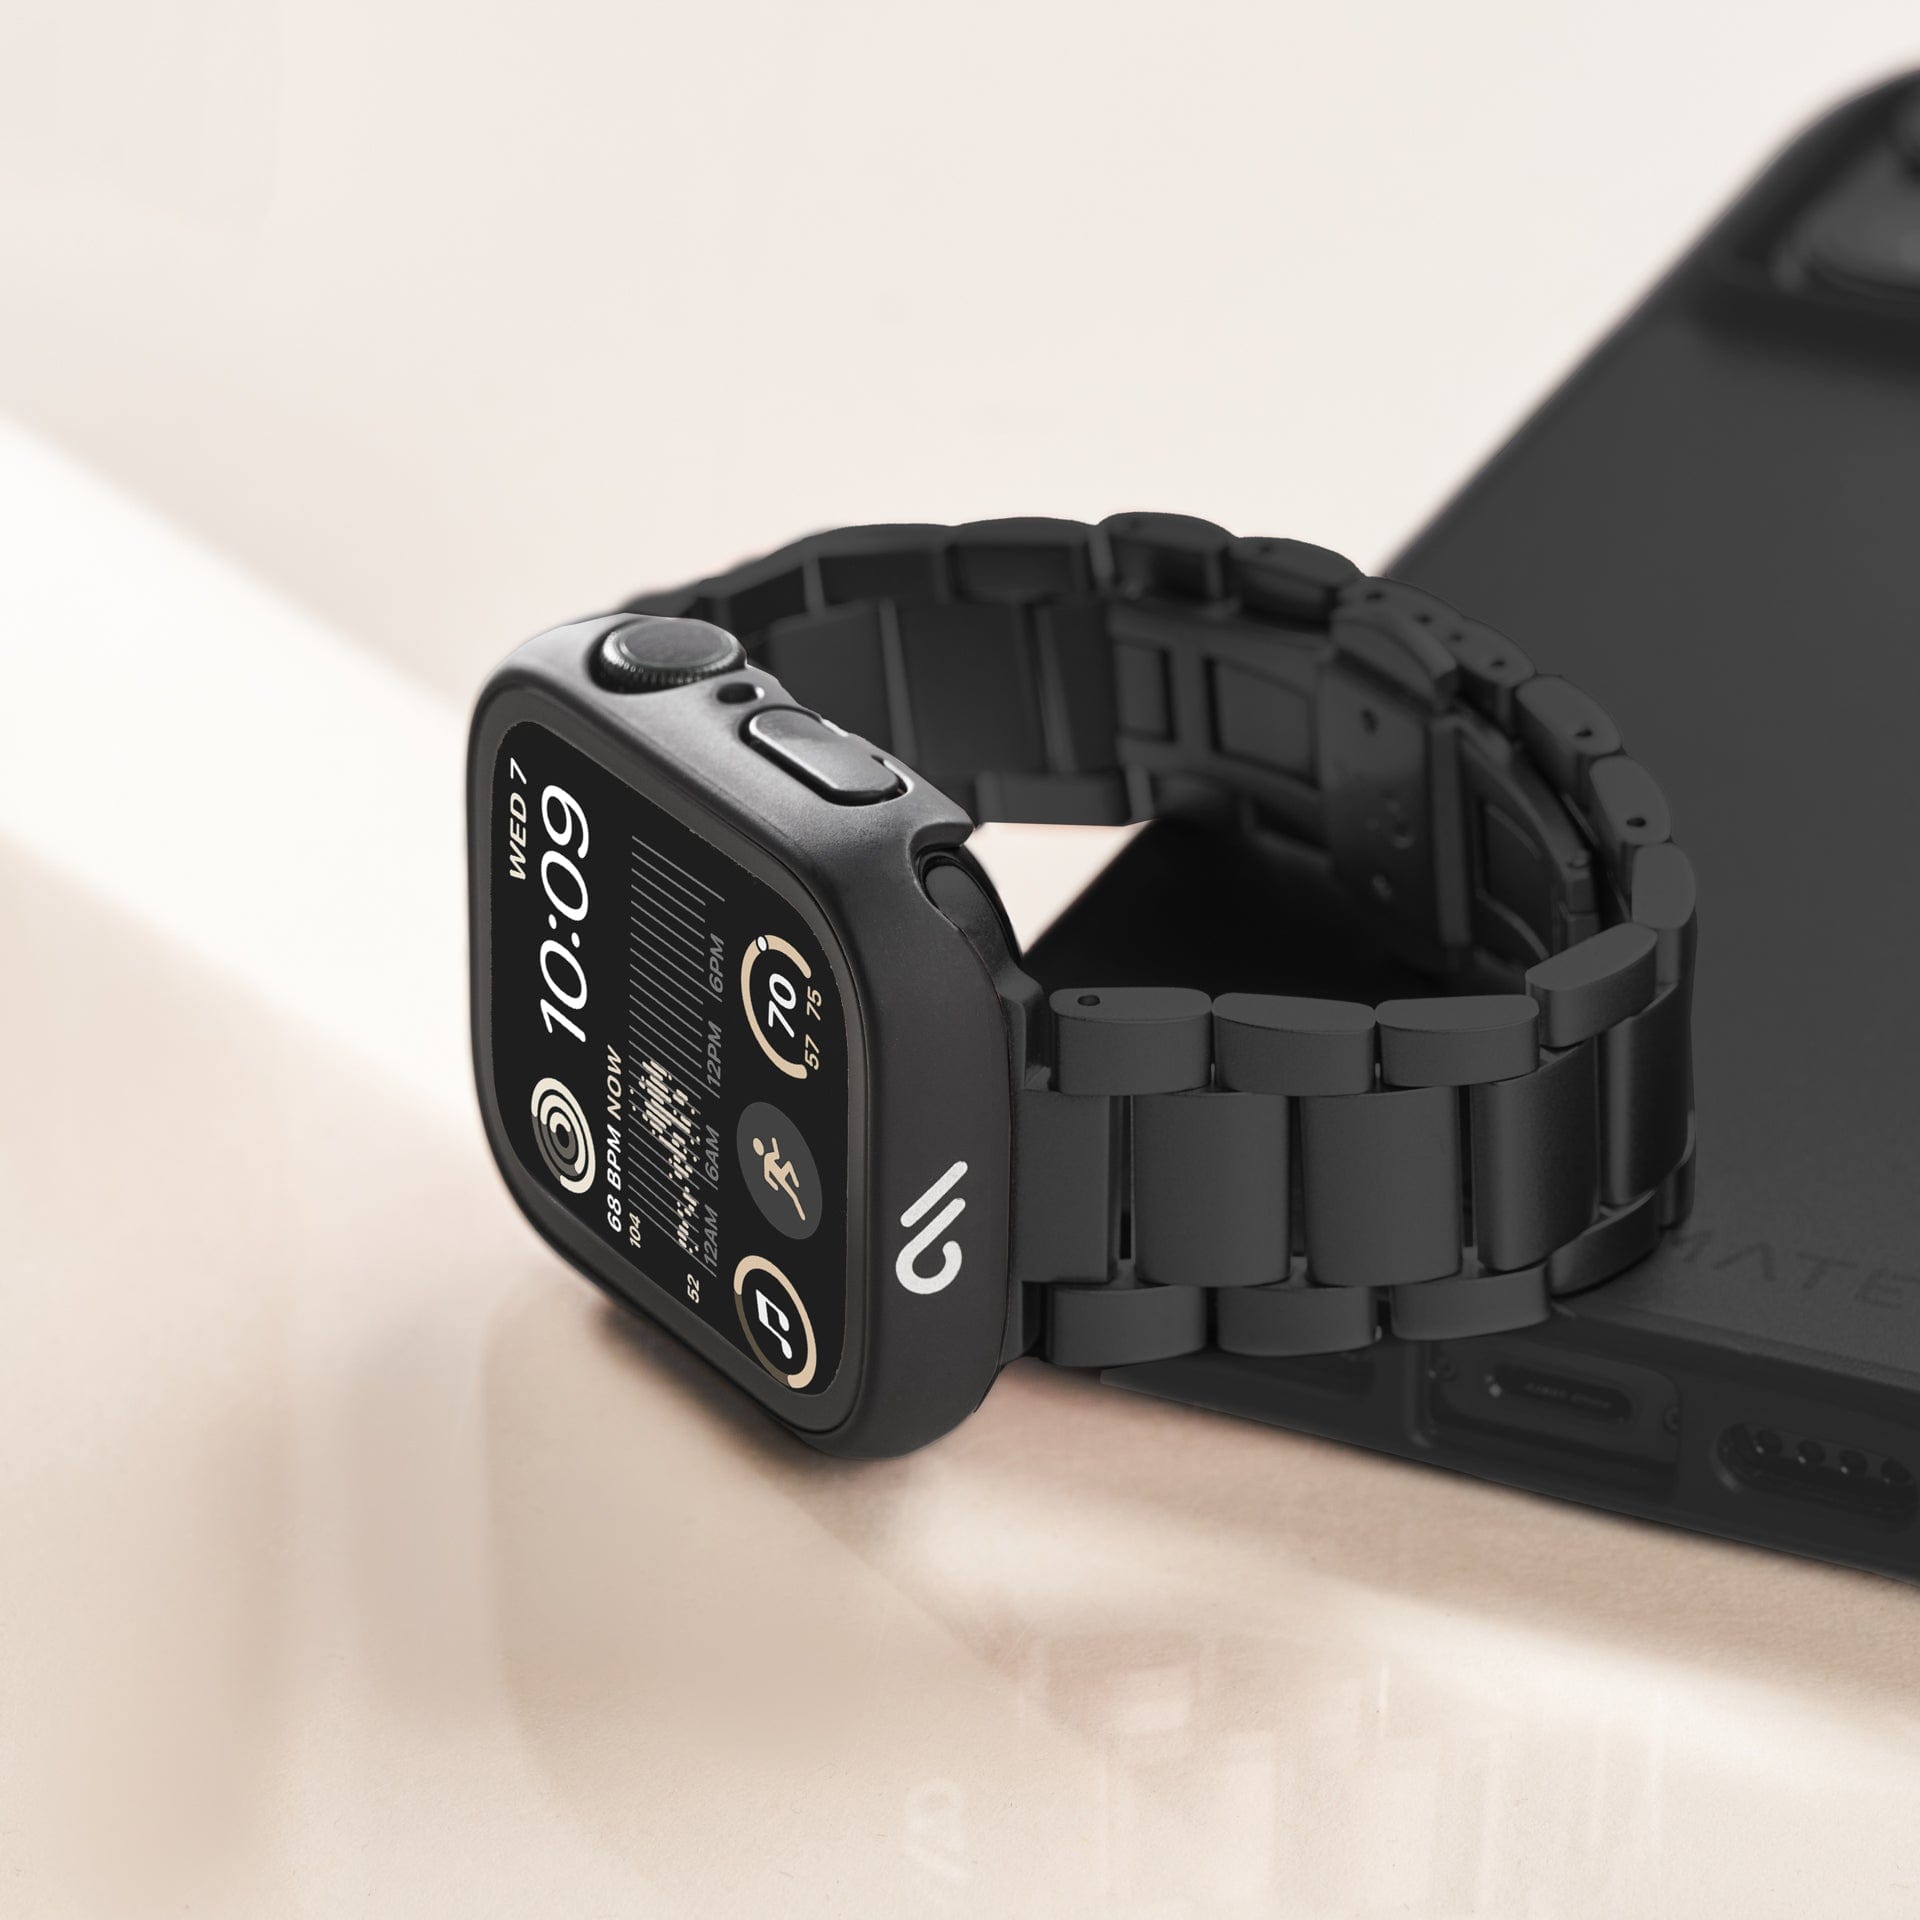 Apple Watch with tough black case and black link chain sitting on top of a phone. 